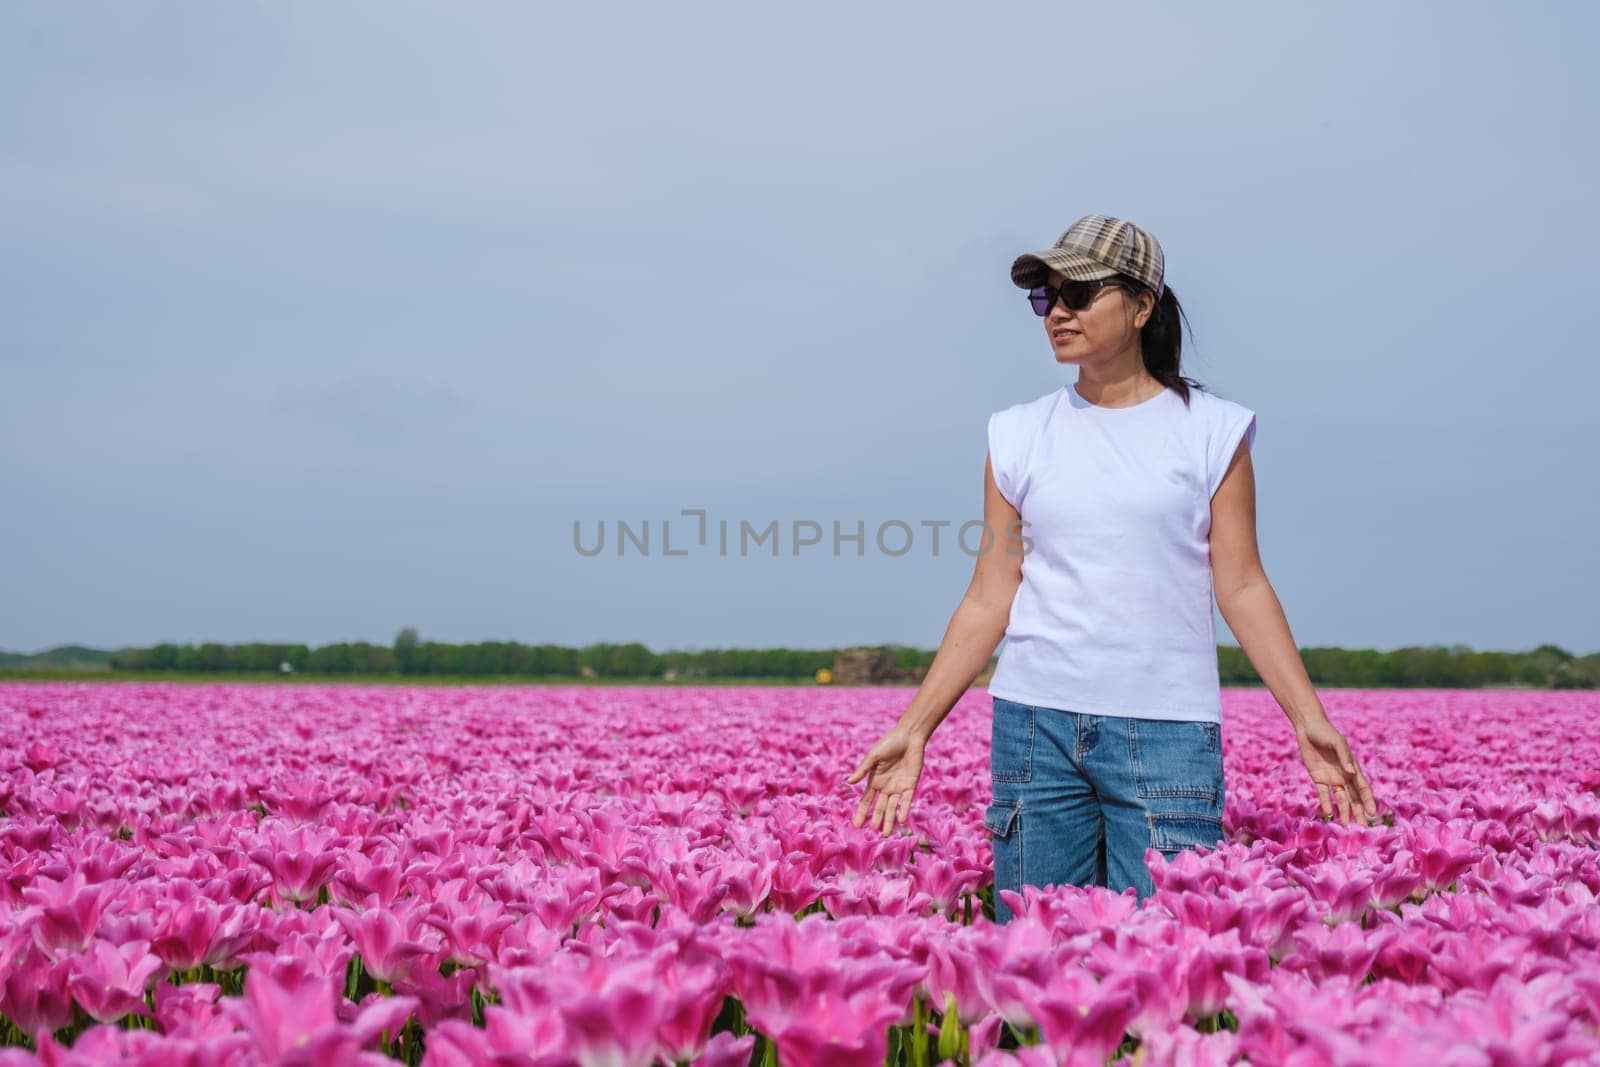 A woman stands gracefully amid a sea of vibrant pink tulips in the scenic Texel, Netherlands, connecting with the beauty of nature.